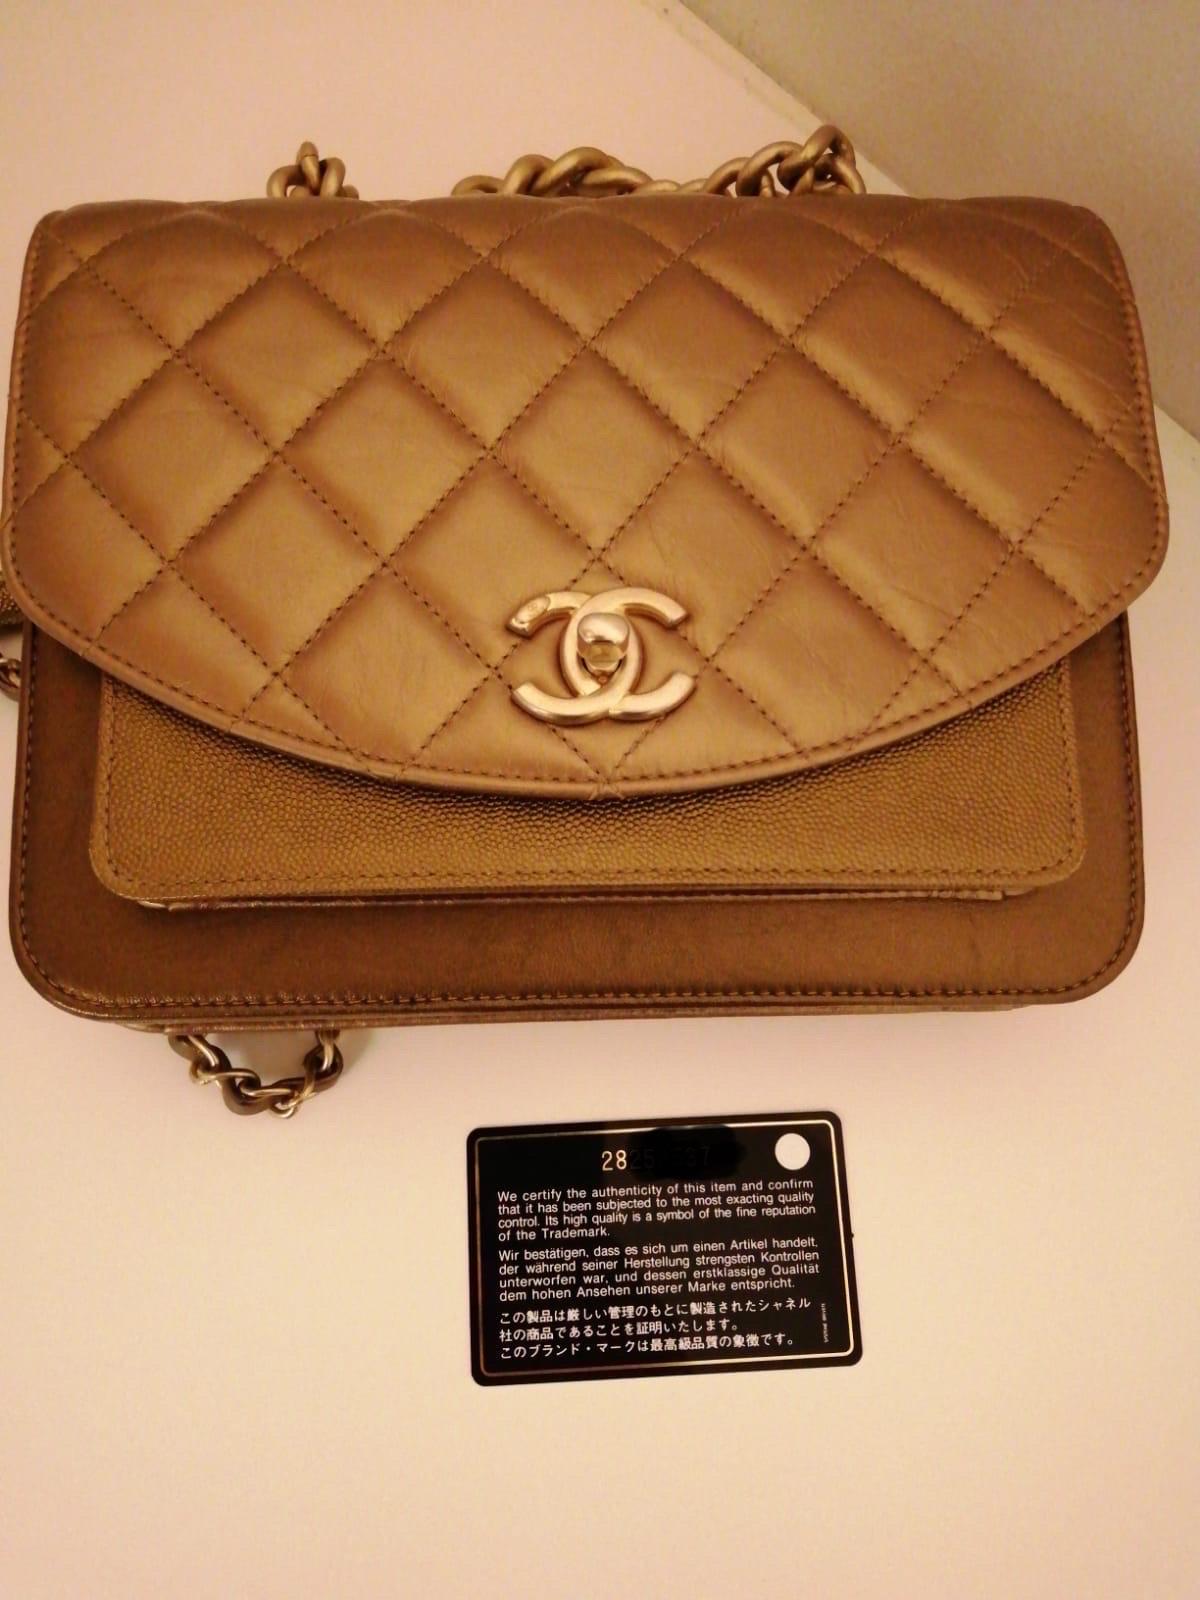 Chanel Business Affinity full set pari al nuovo For Sale 1